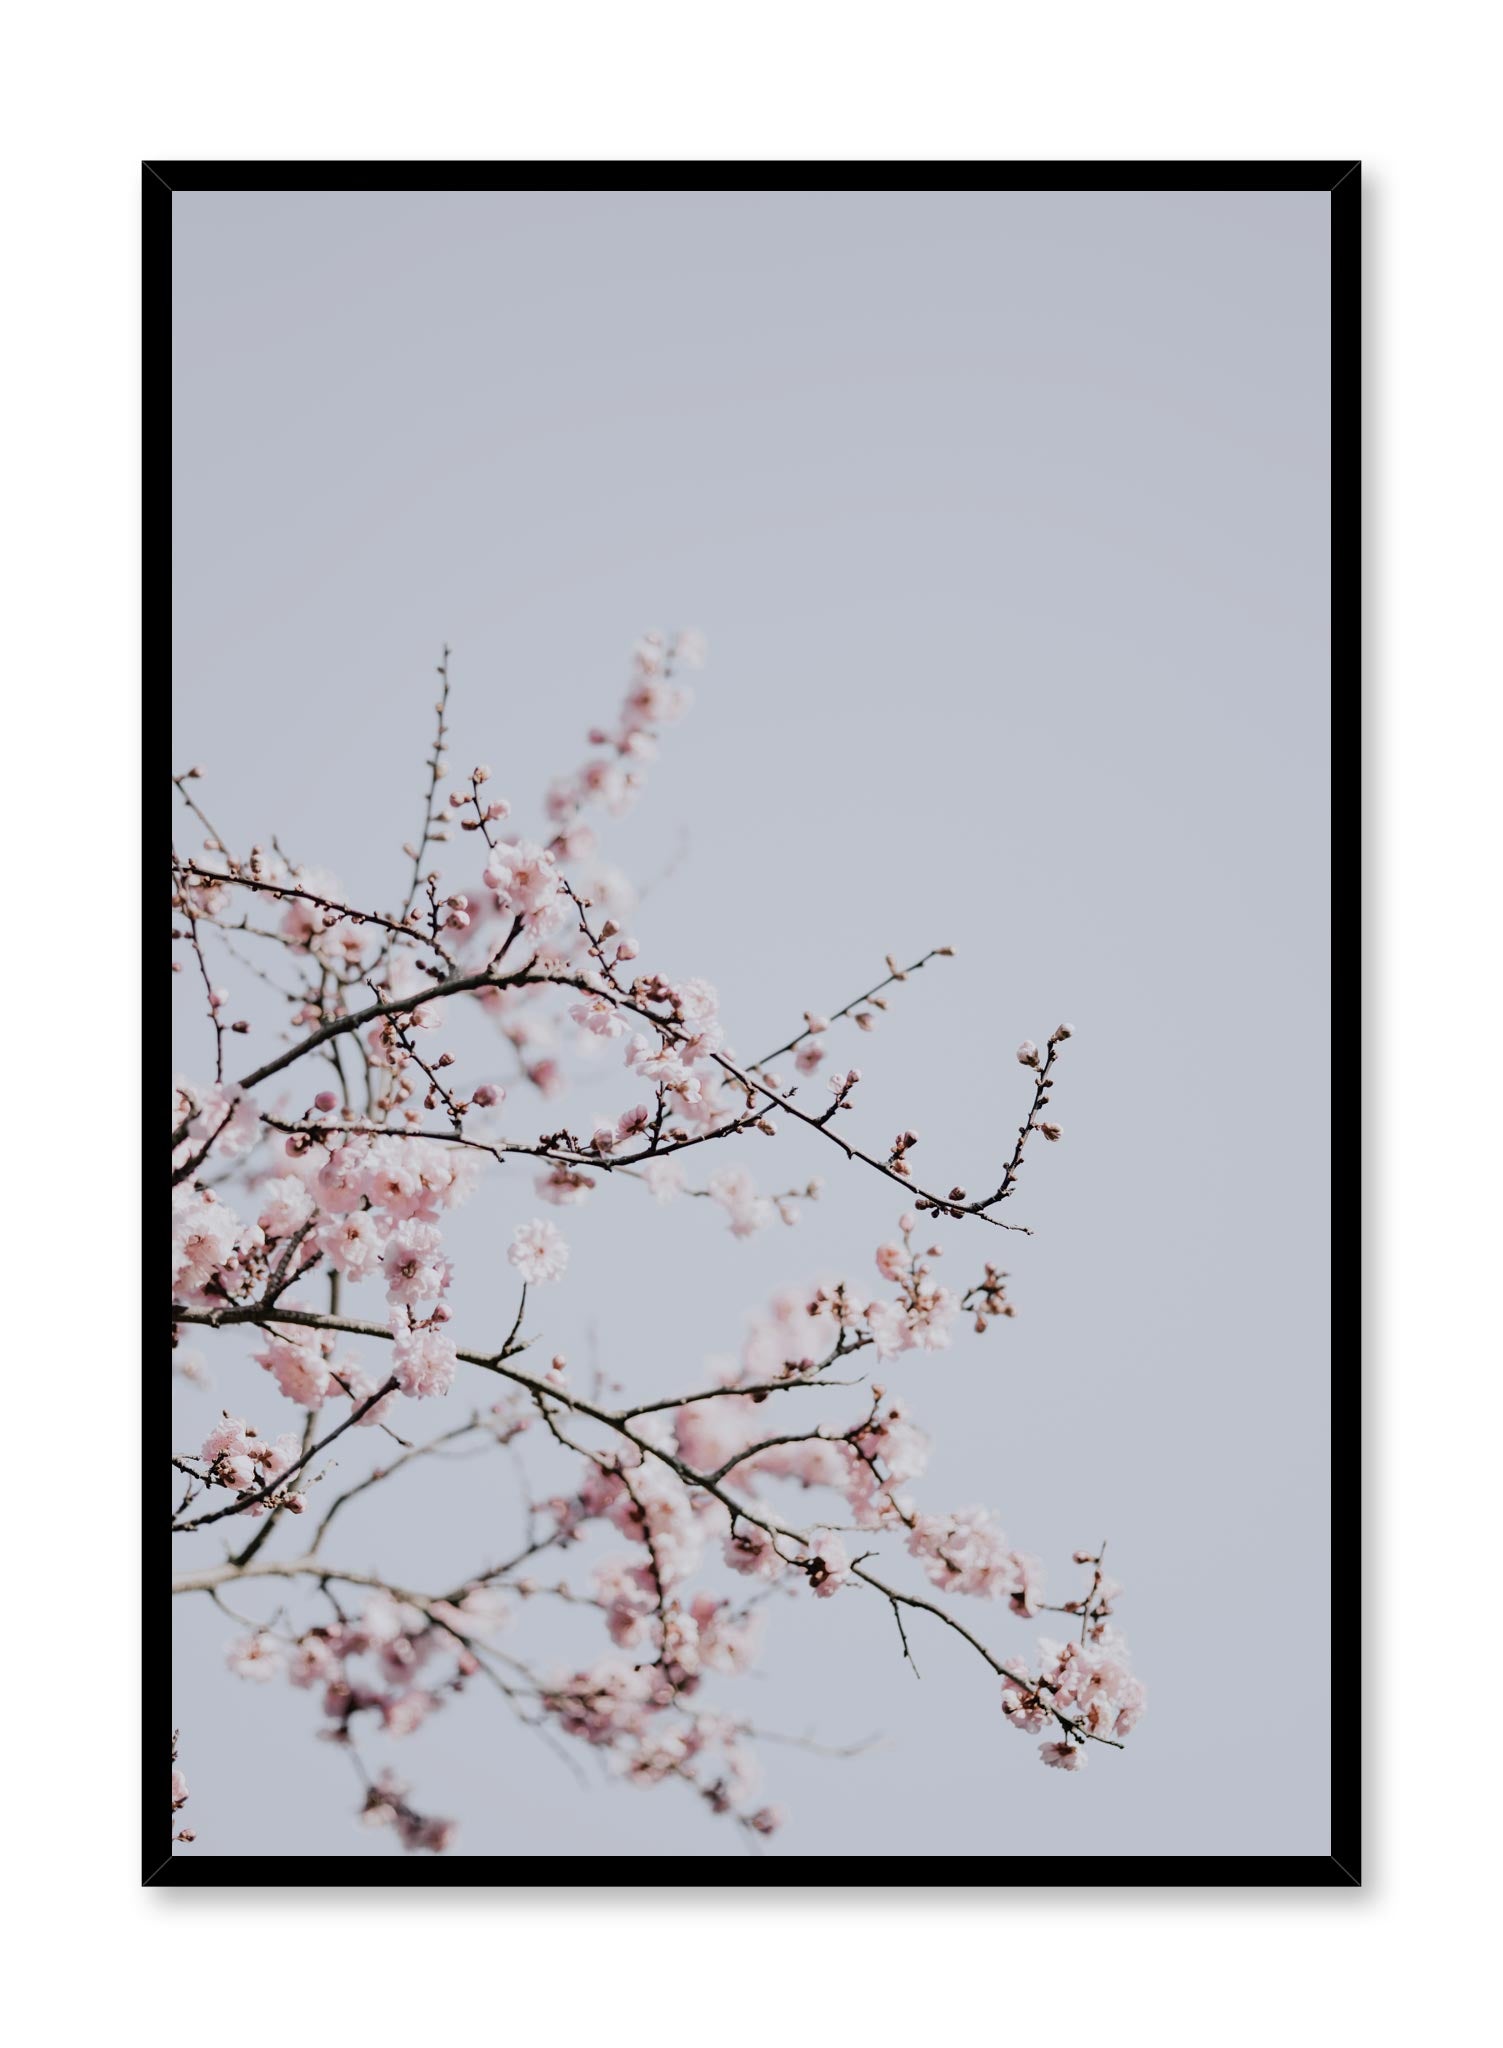 Minimalist design poster by Opposite Wall with Cherry Blossom floral photography